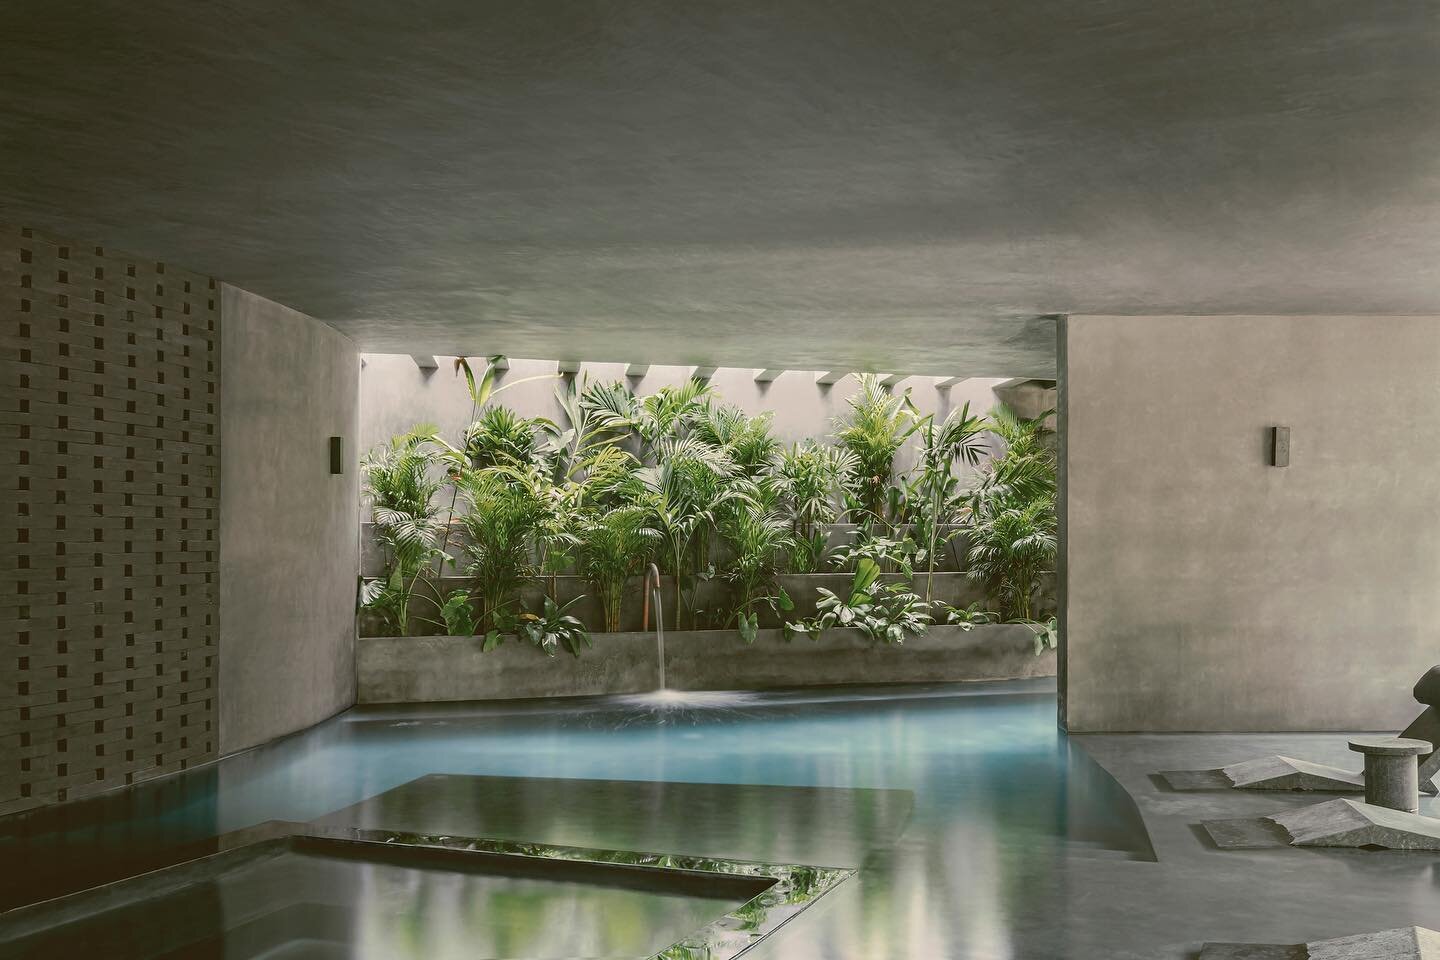 The Spa @luumzama features different temperature pools, sauna, jet beds, jacuzzi, 2 hamman and massage rooms overlooking the patio. It hosts the restaurant @tuuchtulum and is now open to the public. 
Architecture: @colab_tulum 
Construction: @grupor4